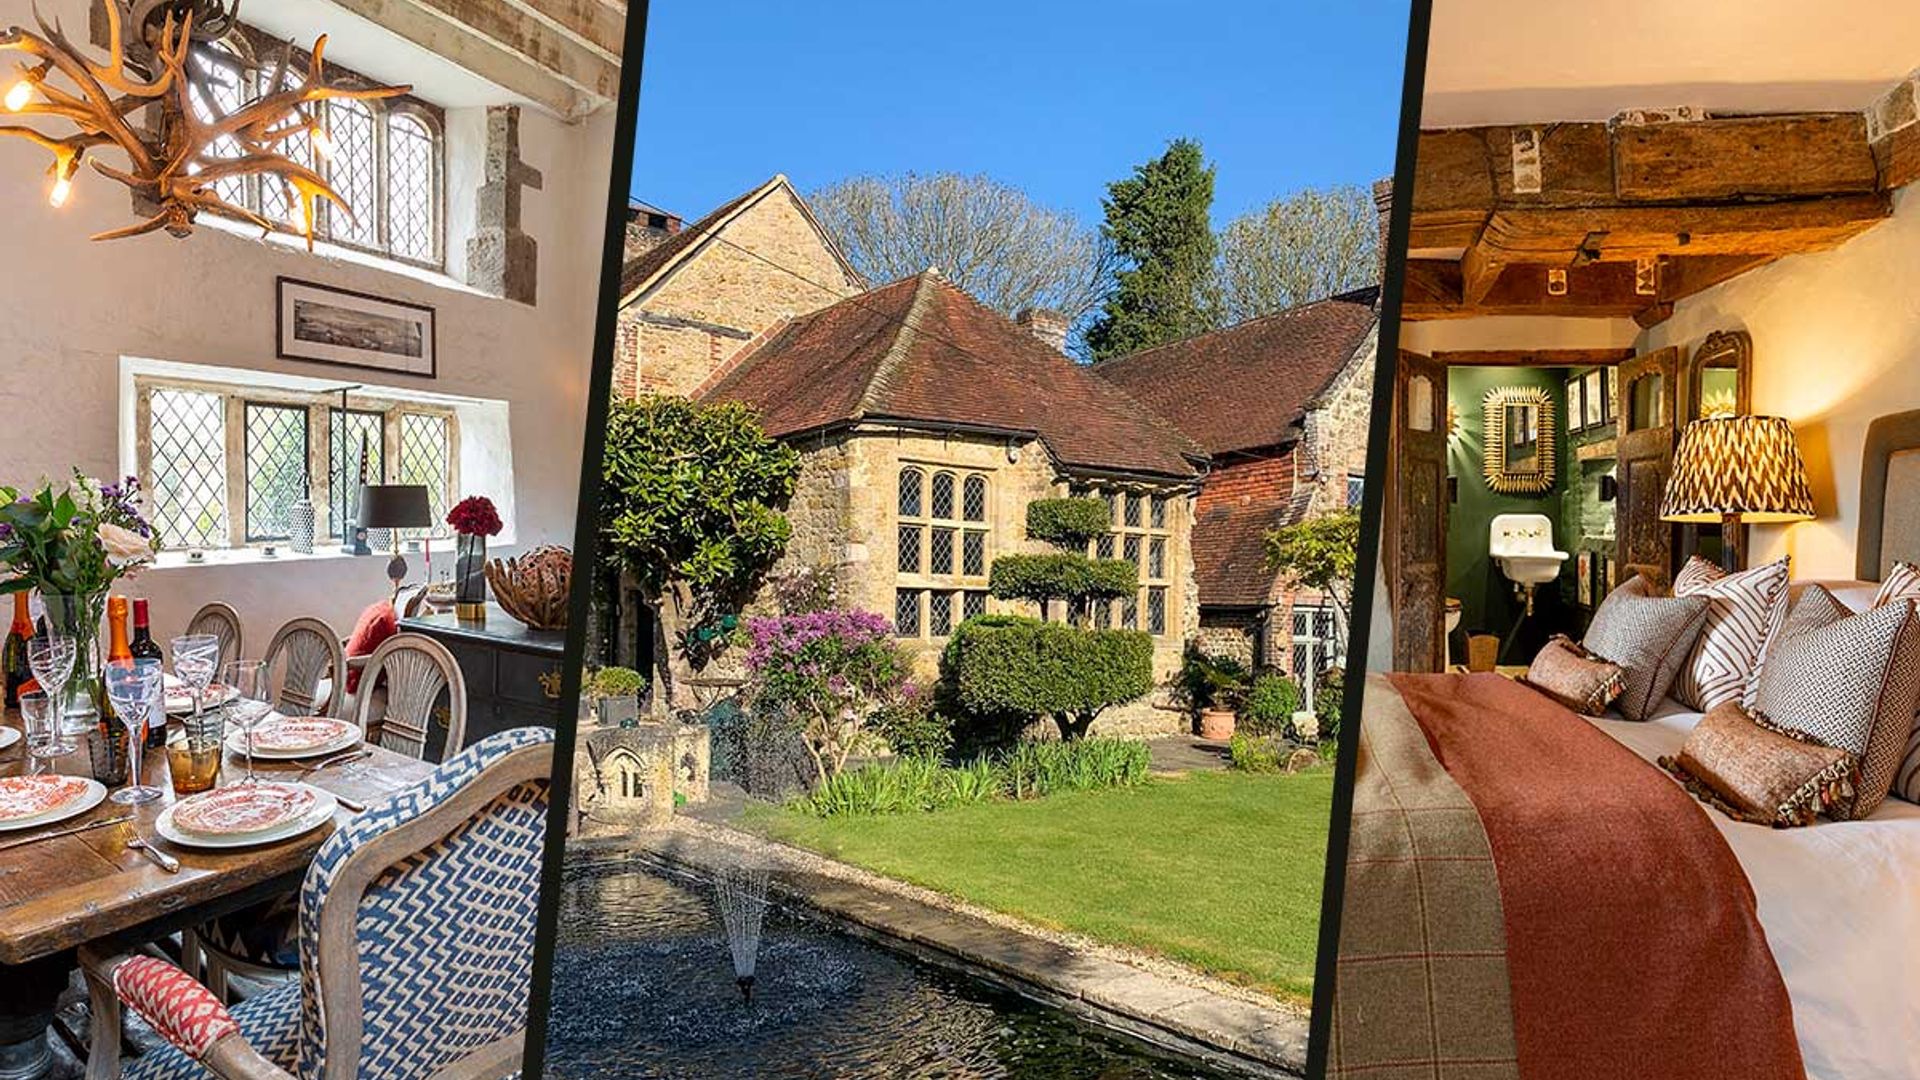 This stunning Elizabethan Manor is fit for royalty – find out who's stayed there